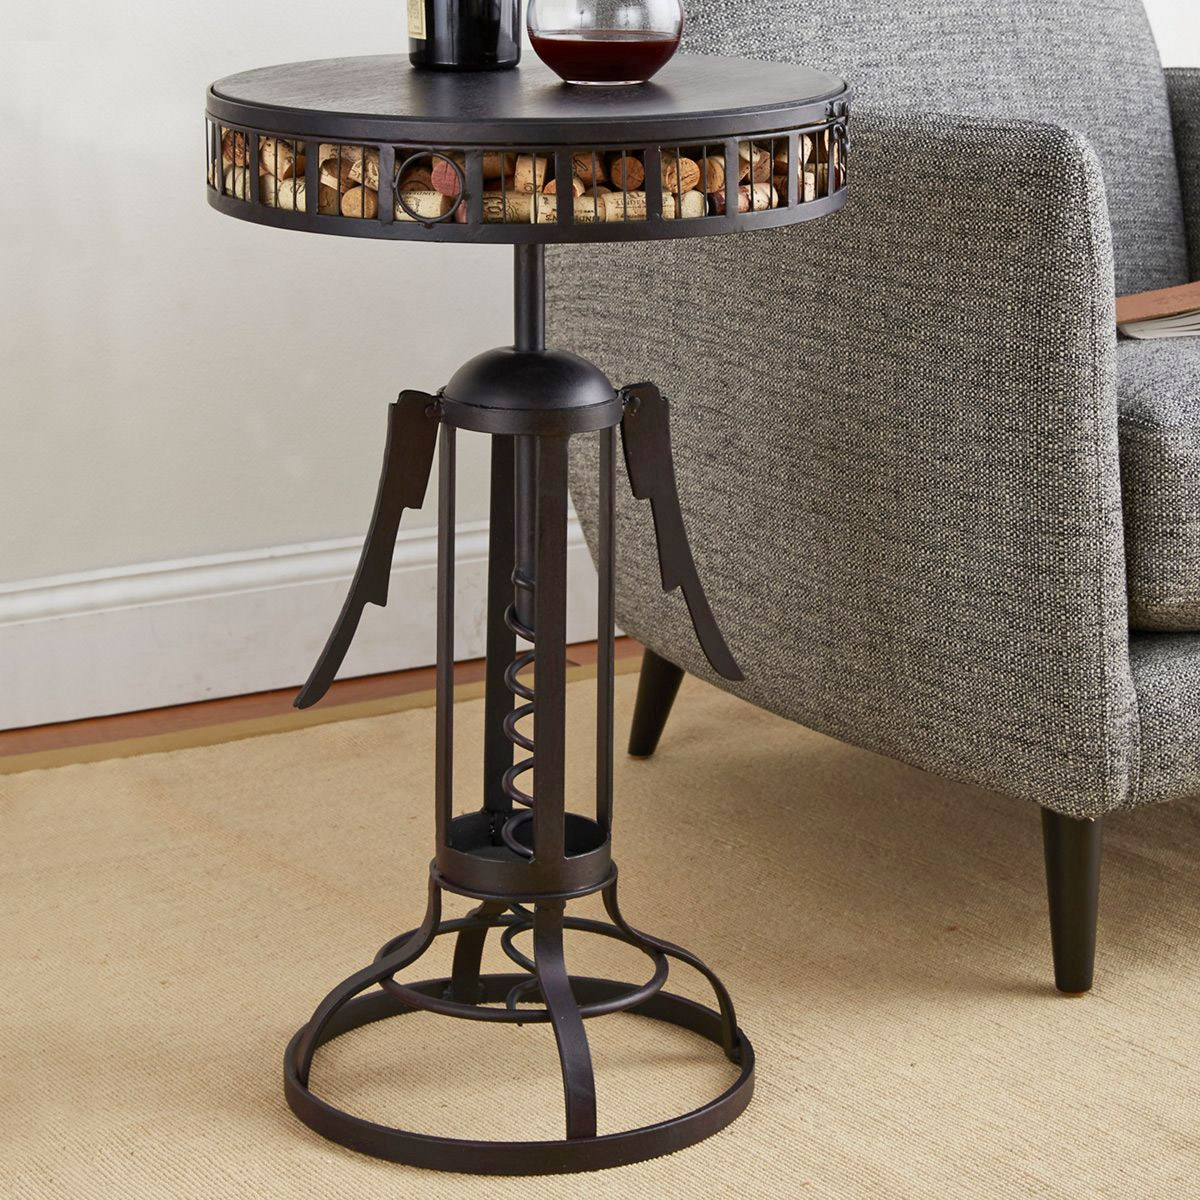 Giant Wine Opener Corkscrew Side Table That Stores Your Used Corks